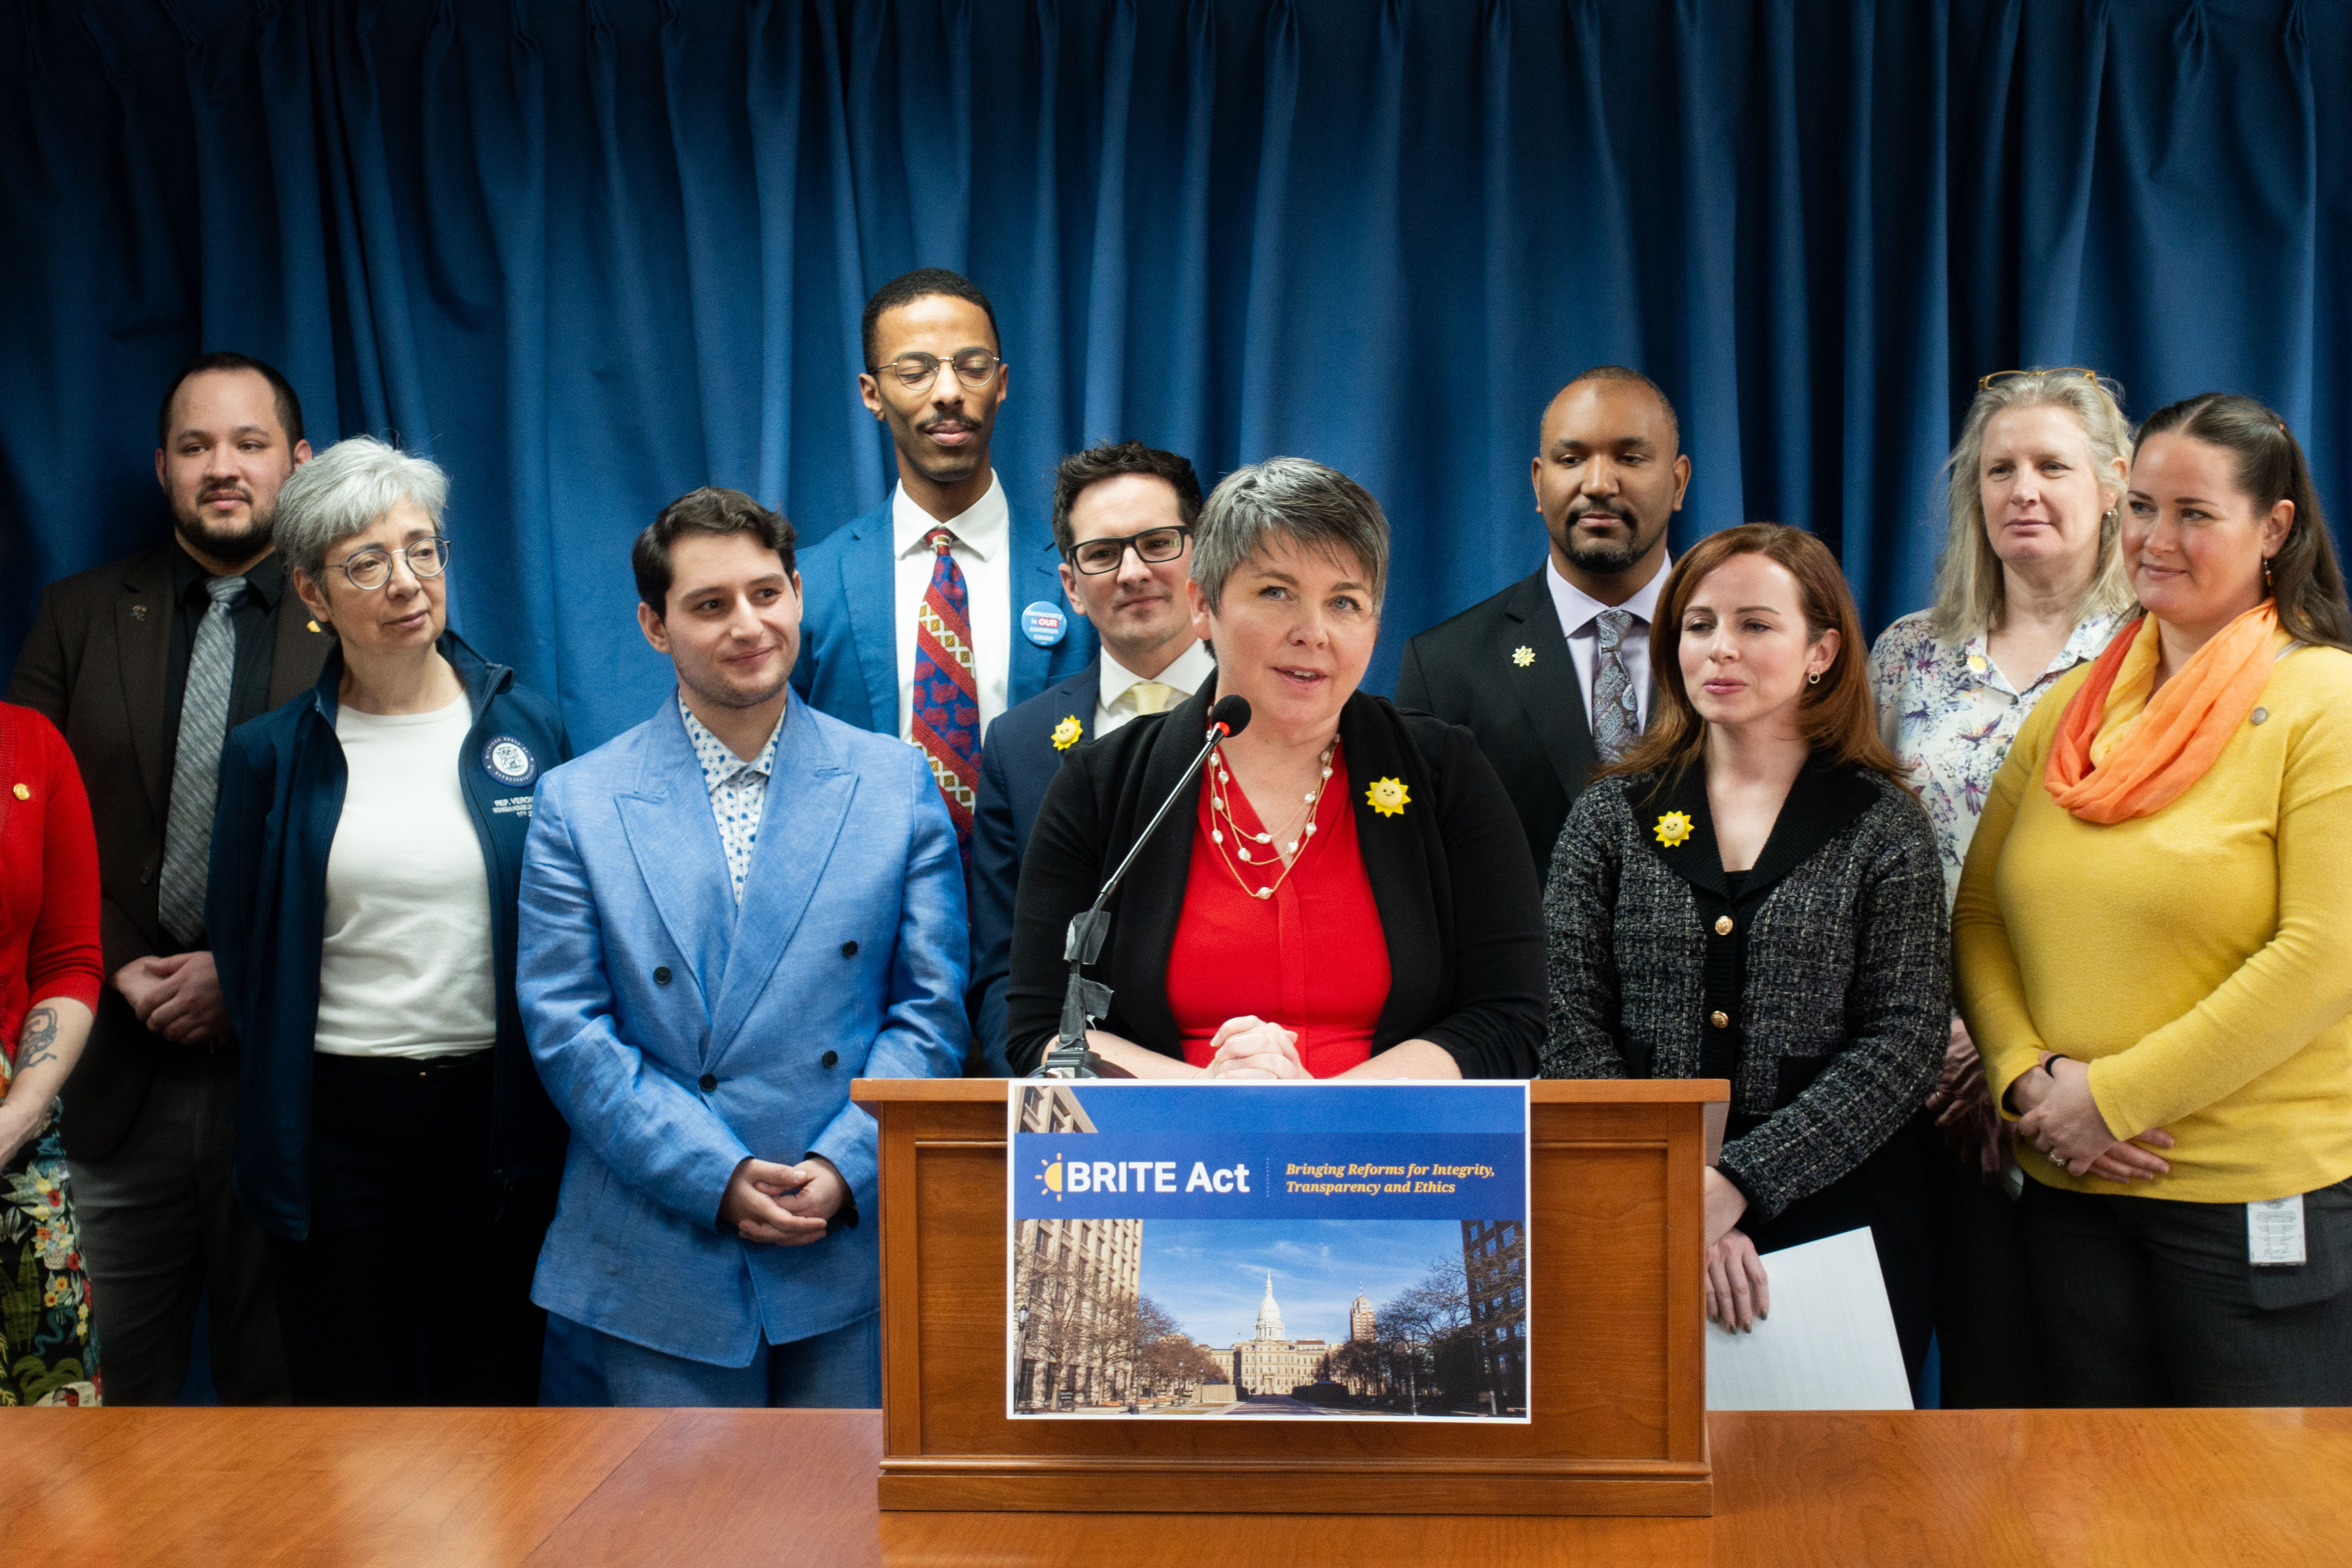 Rep. Betsy Coffia (center) of Traverse City speaks about the BRITE Act, a package of transparency bills.